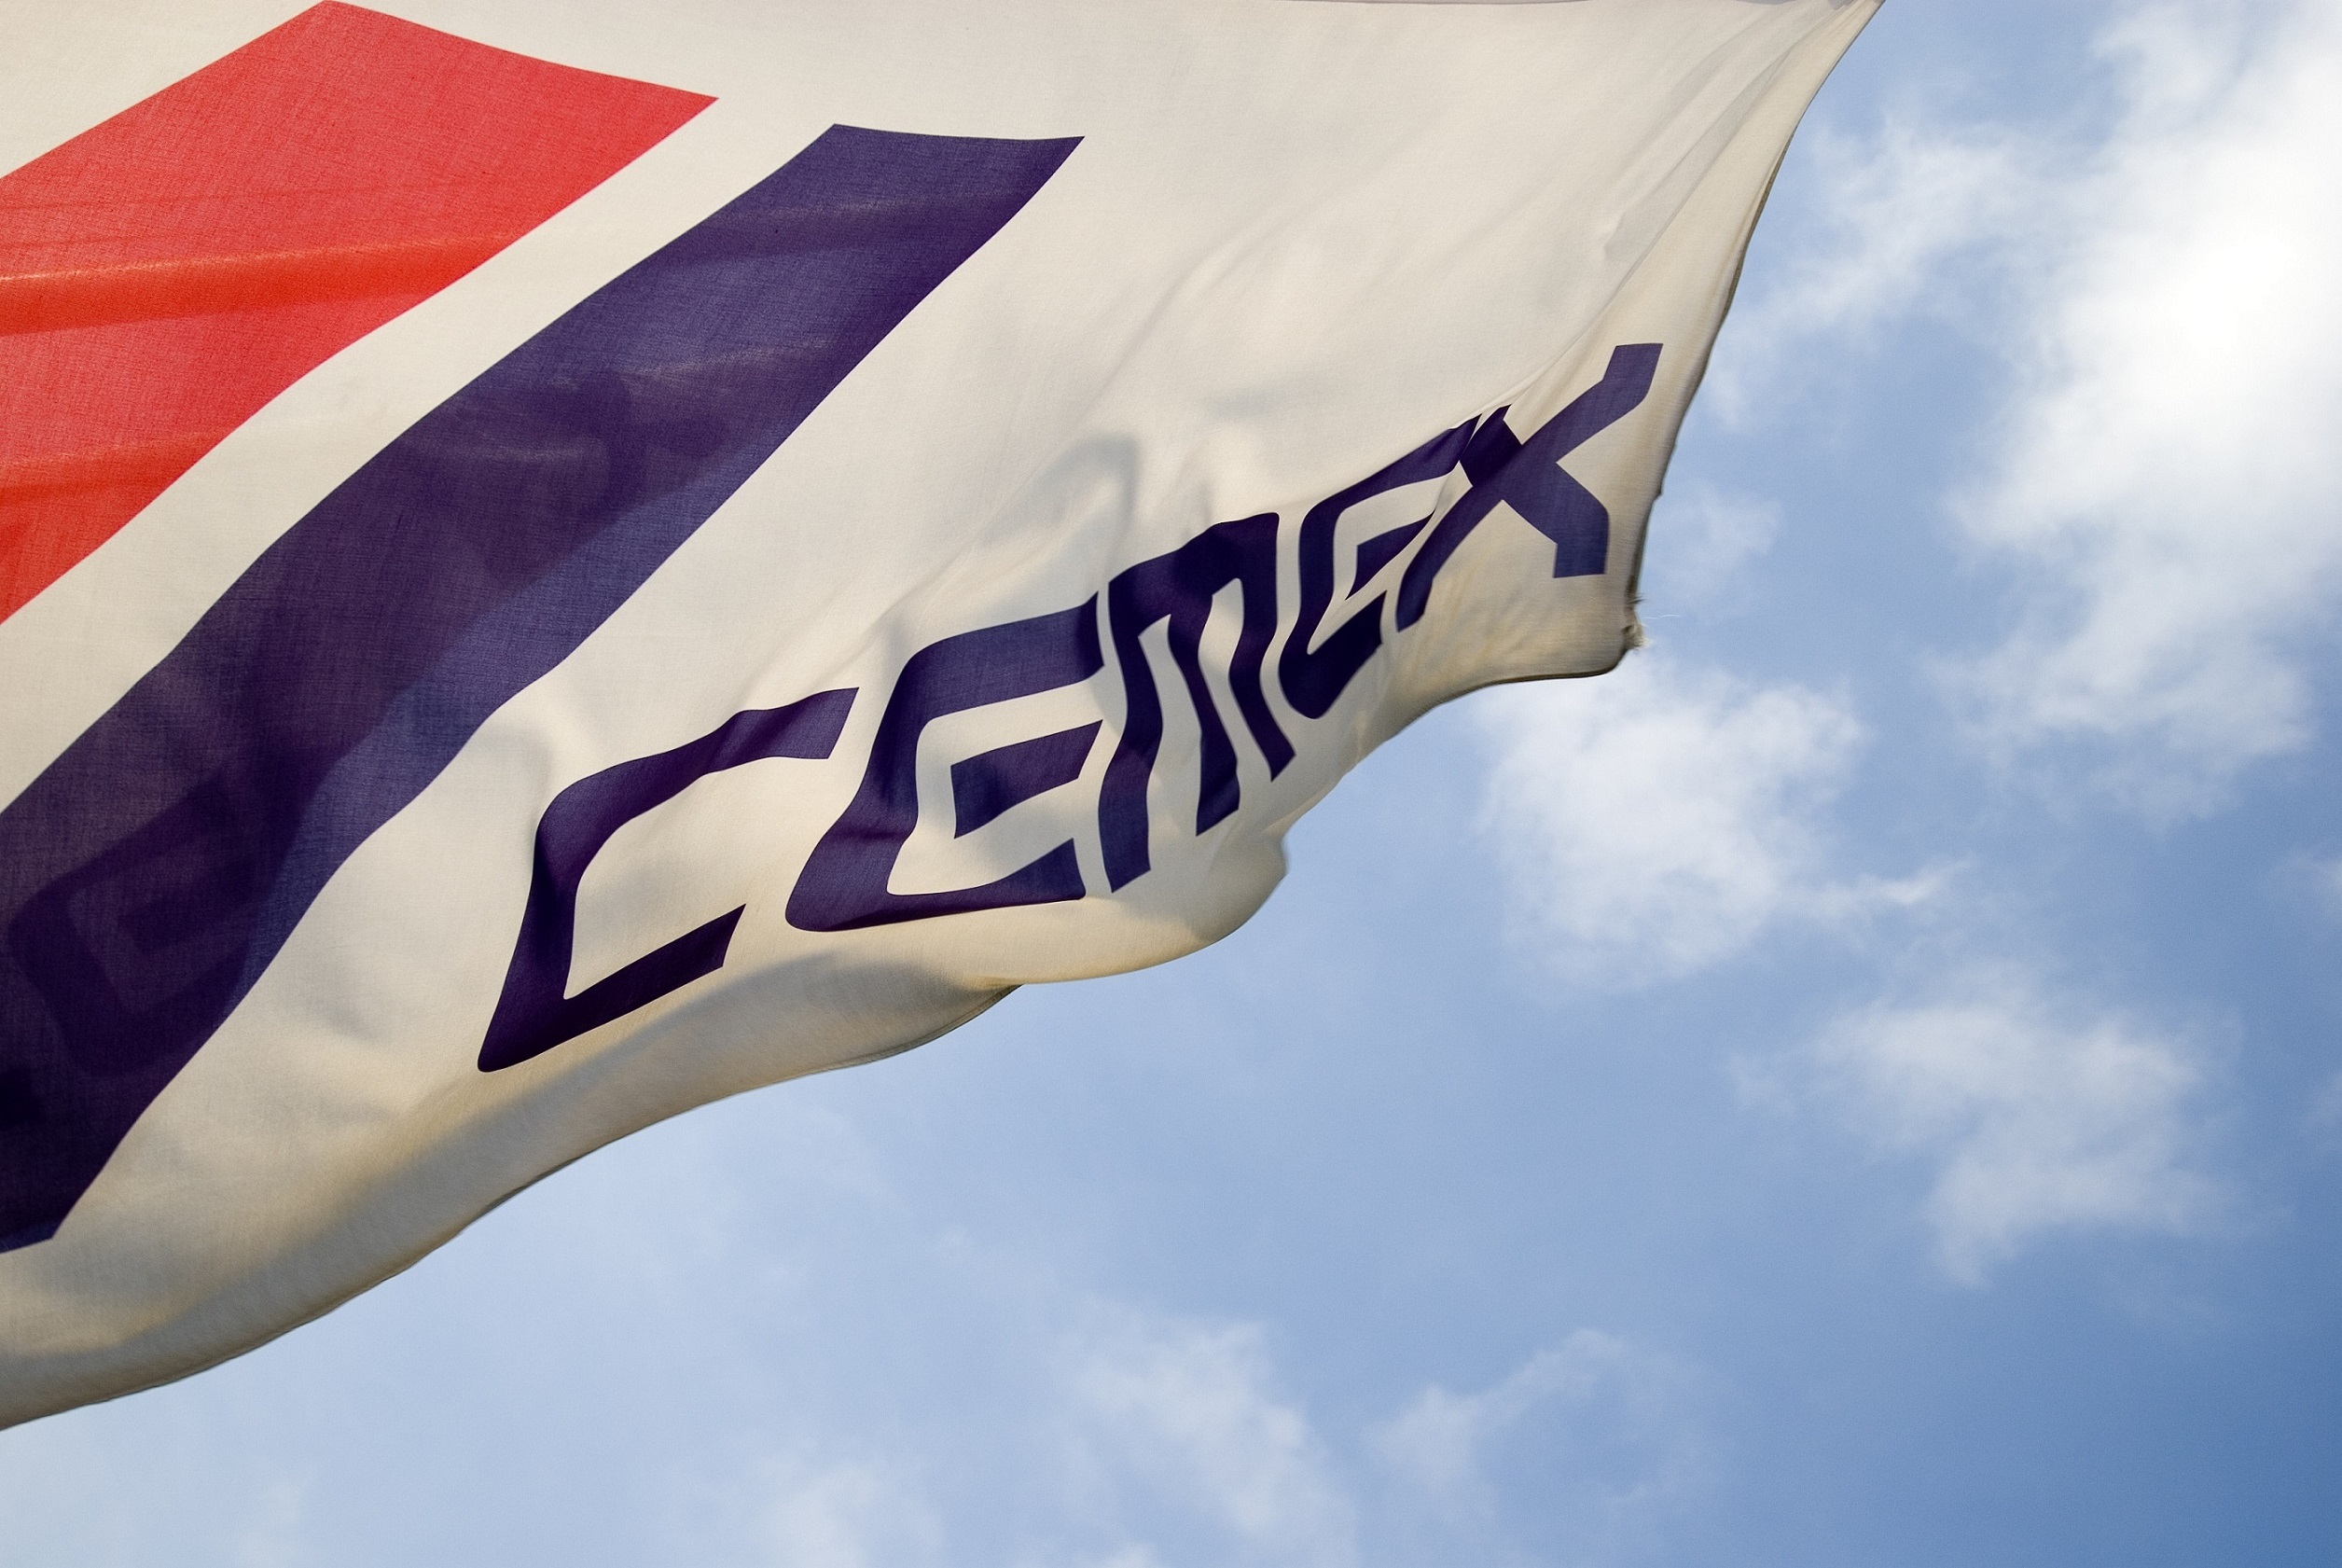 Cemex will invest in the competition winners